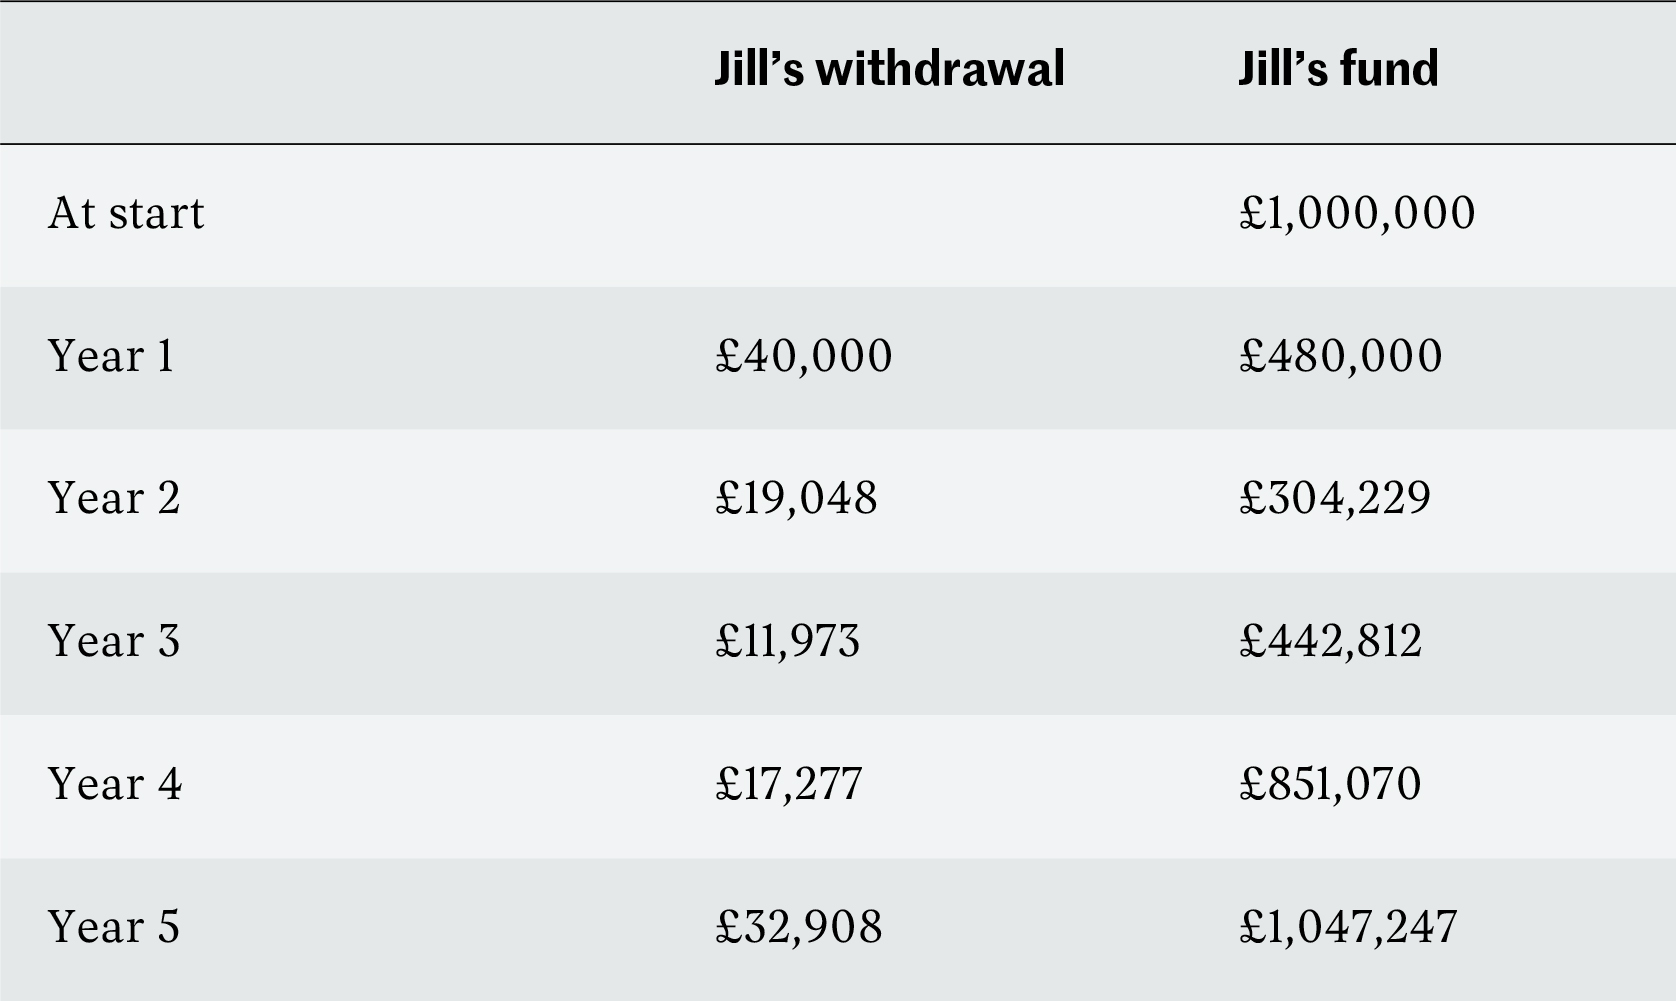 Withdrawals from £1000000 fund for Jill